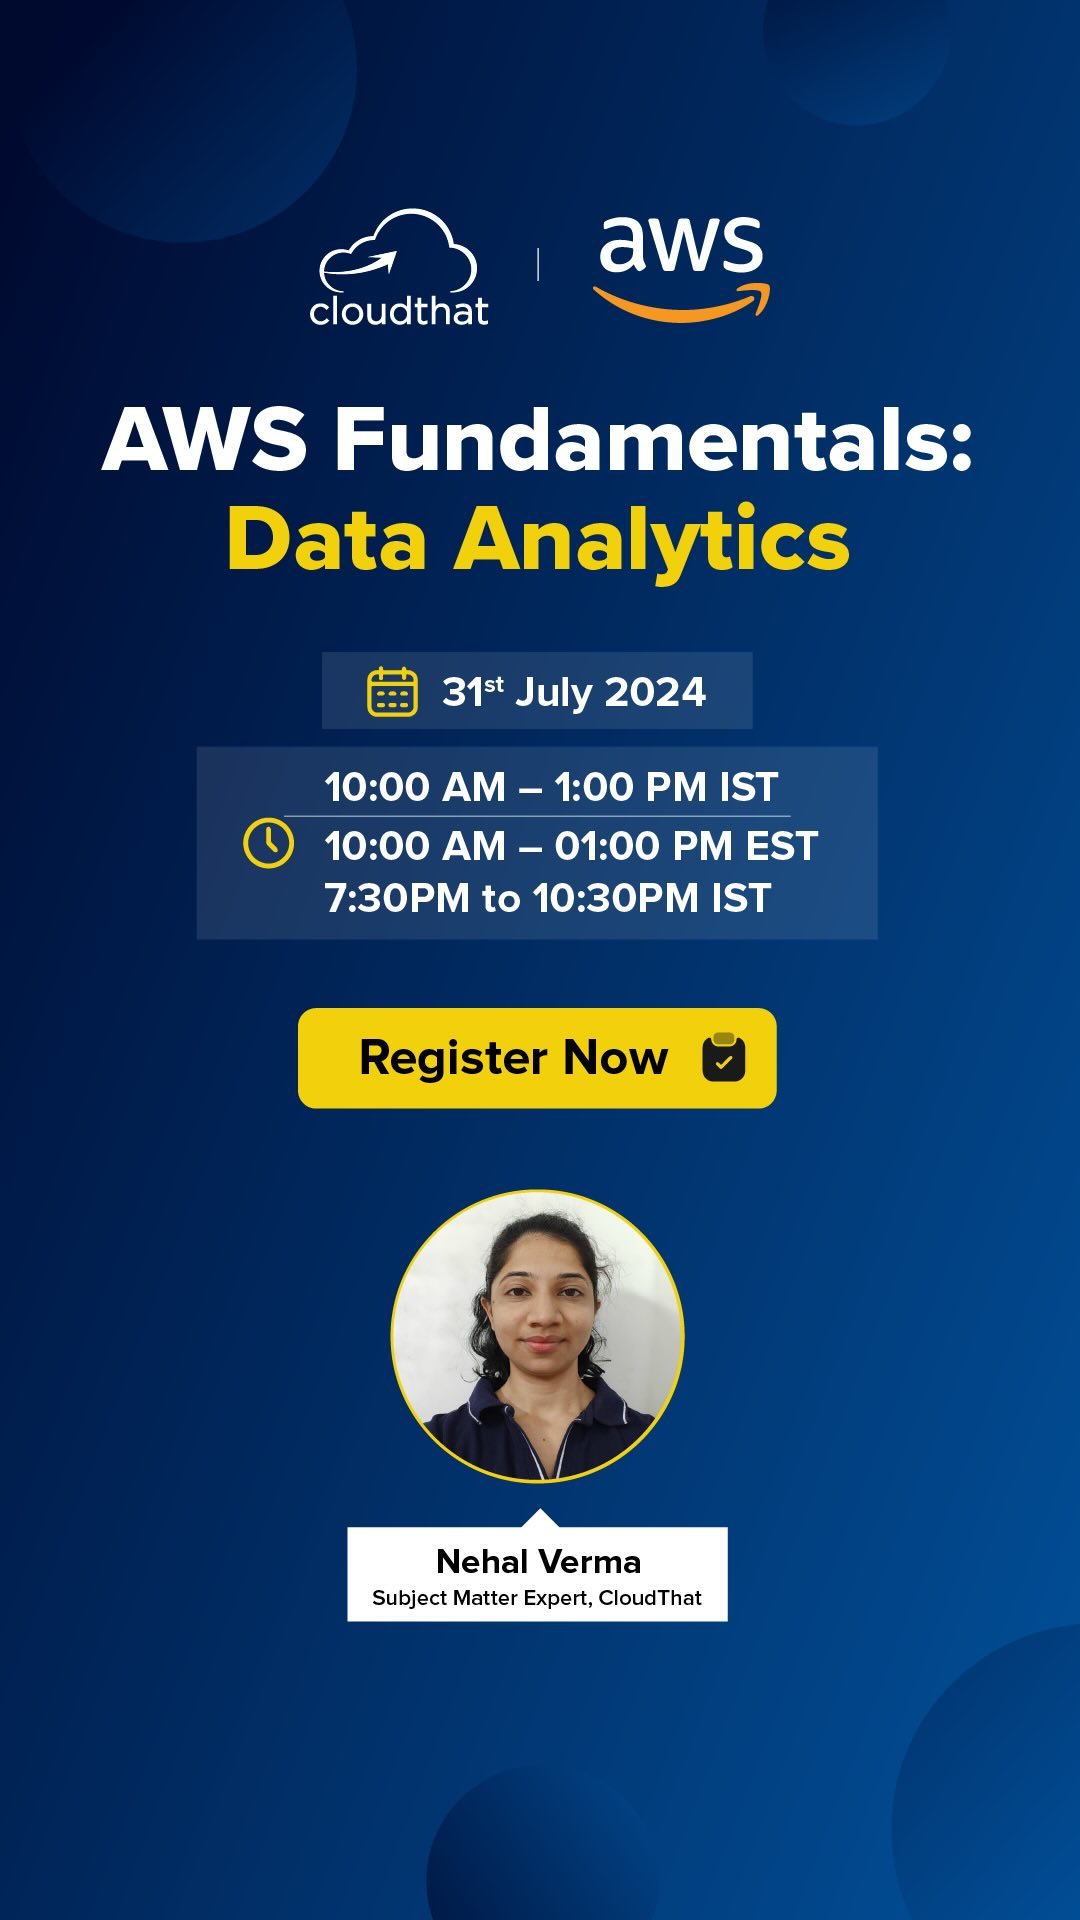 To register for the Free Training click on the link in bio.

Drowning in data but can’t find the insights you need? It’s time to turn your data into your biggest asset! Join our FREE training on “AWS Fundamentals - Data Analytics” and discover how to transform raw data into actionable strategies. 

What You’ll Gain?
A comprehensive understanding of AWS data analytics services.
Practical knowledge of data storage, processing, and analysis on AWS.
The ability to visualize data and create reports that drive business decisions.
Best practices for data management and security within the AWS ecosystem.

@amazonwebservices 

#AWS #DataAnalytics #AWSTraining #TechTraining #FreeTraining #CloudComputing #AWSData